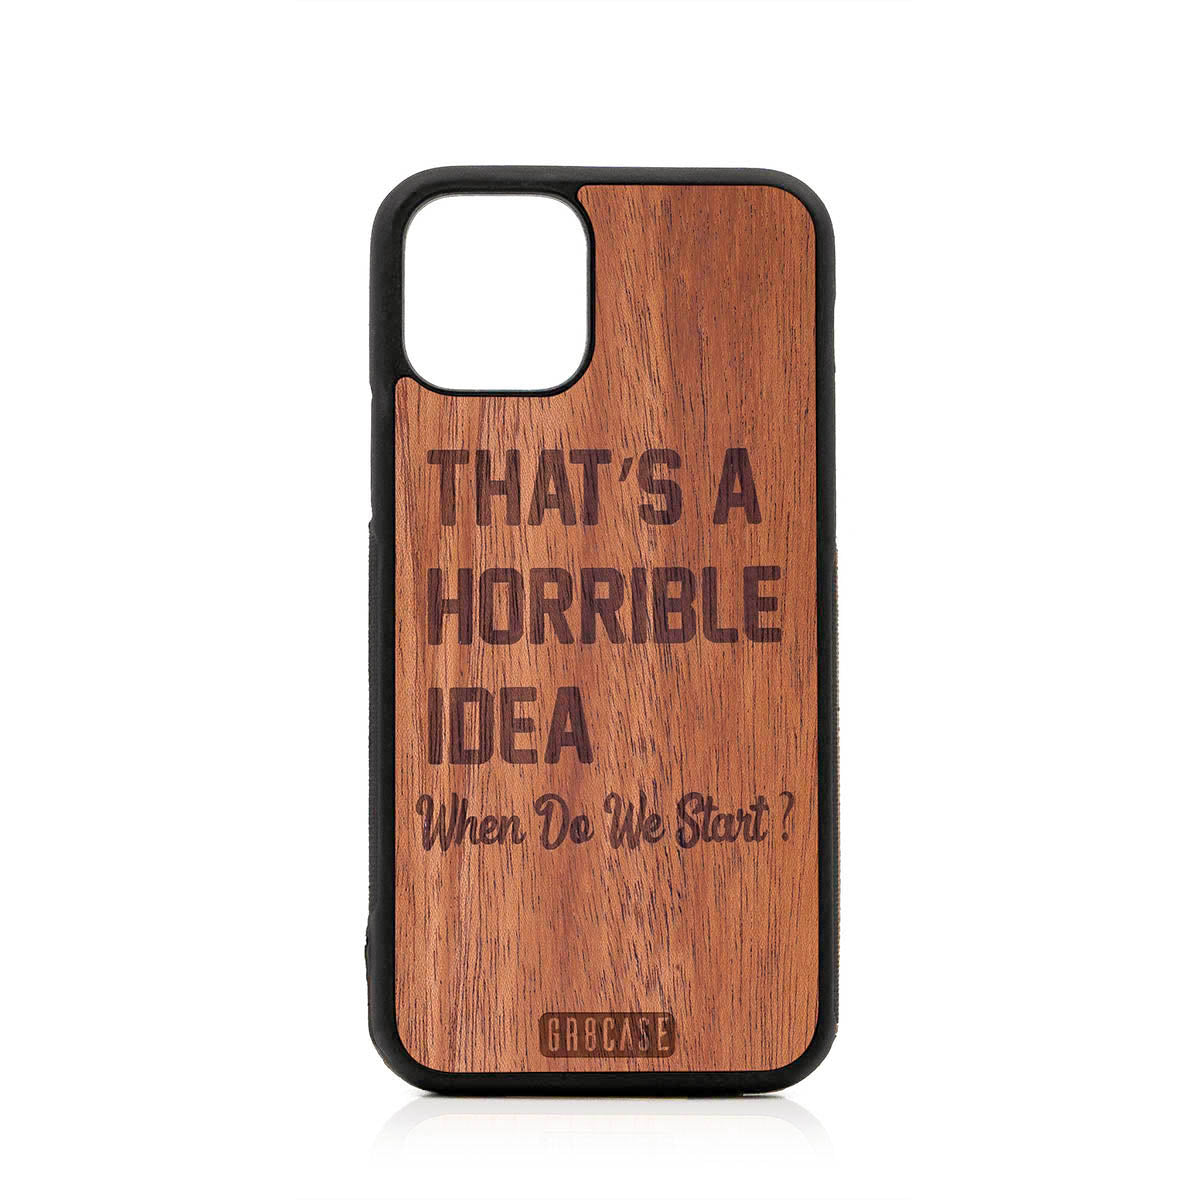 That's A Horrible idea When Do We Start? Design Wood Case For iPhone 11 Pro